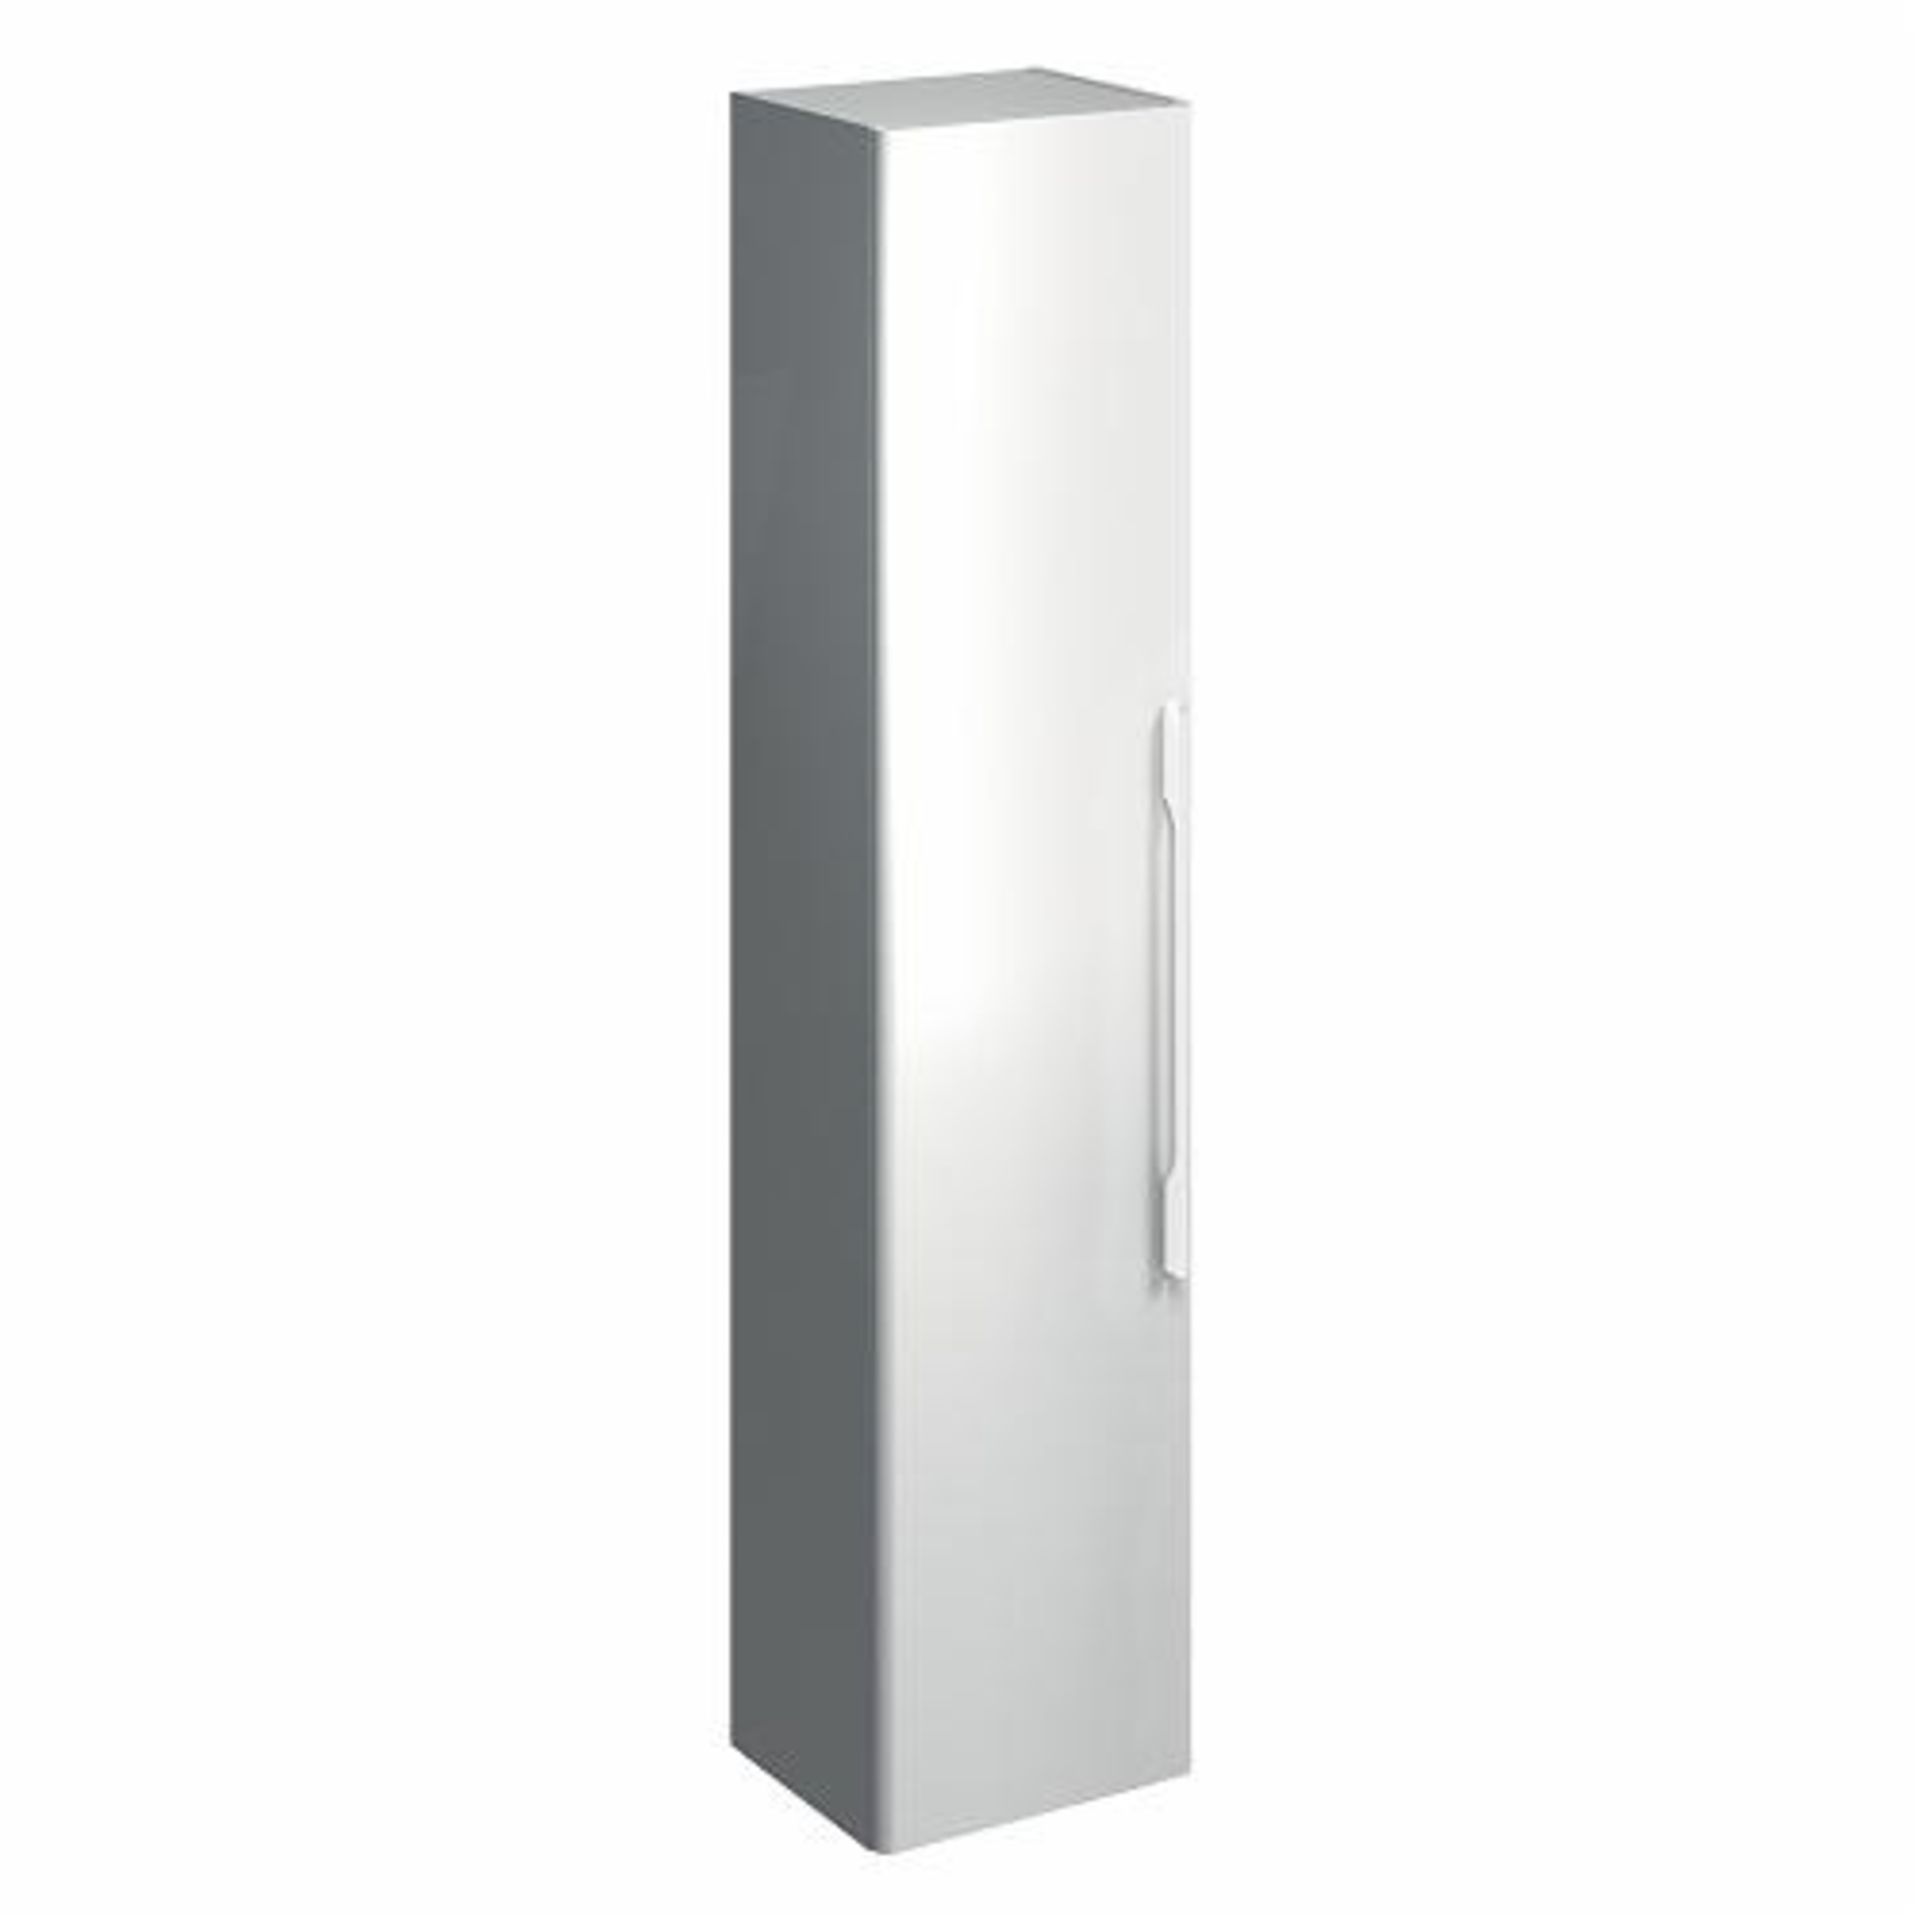 (QR111) Twyfords 1800mm White Tall Storage Unit. RRP £664.99. One door with soft closing mecha...